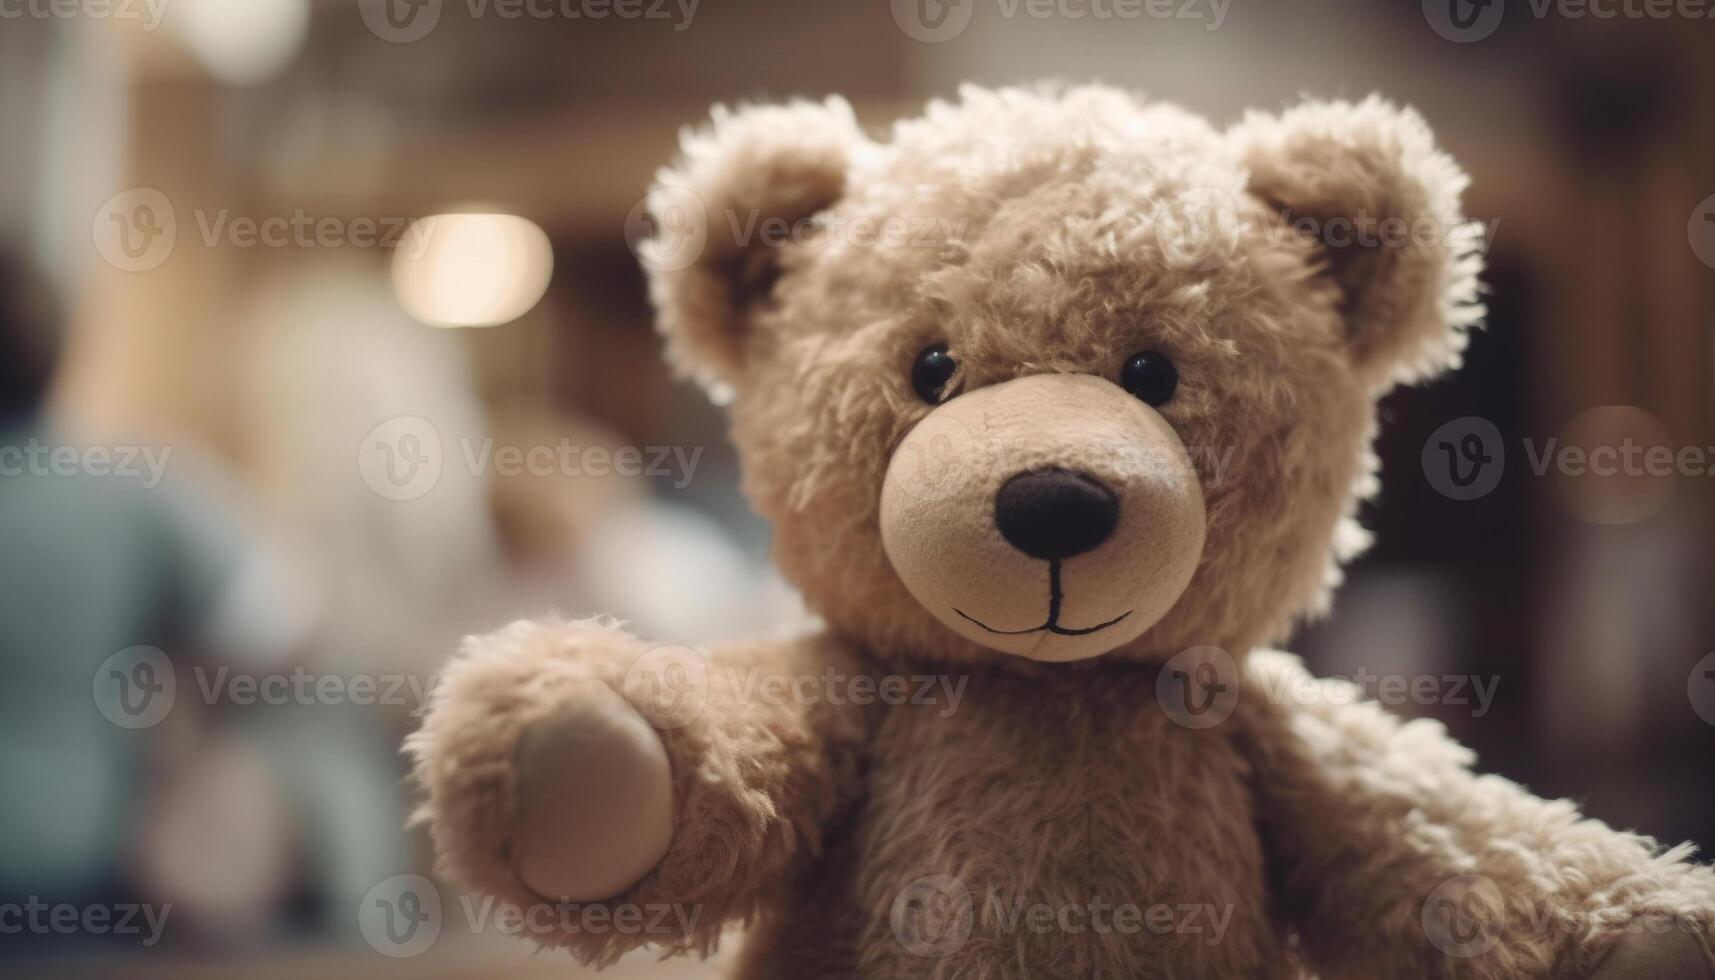 Cute stuffed toy sitting on a fluffy background, perfect gift generated by AI photo